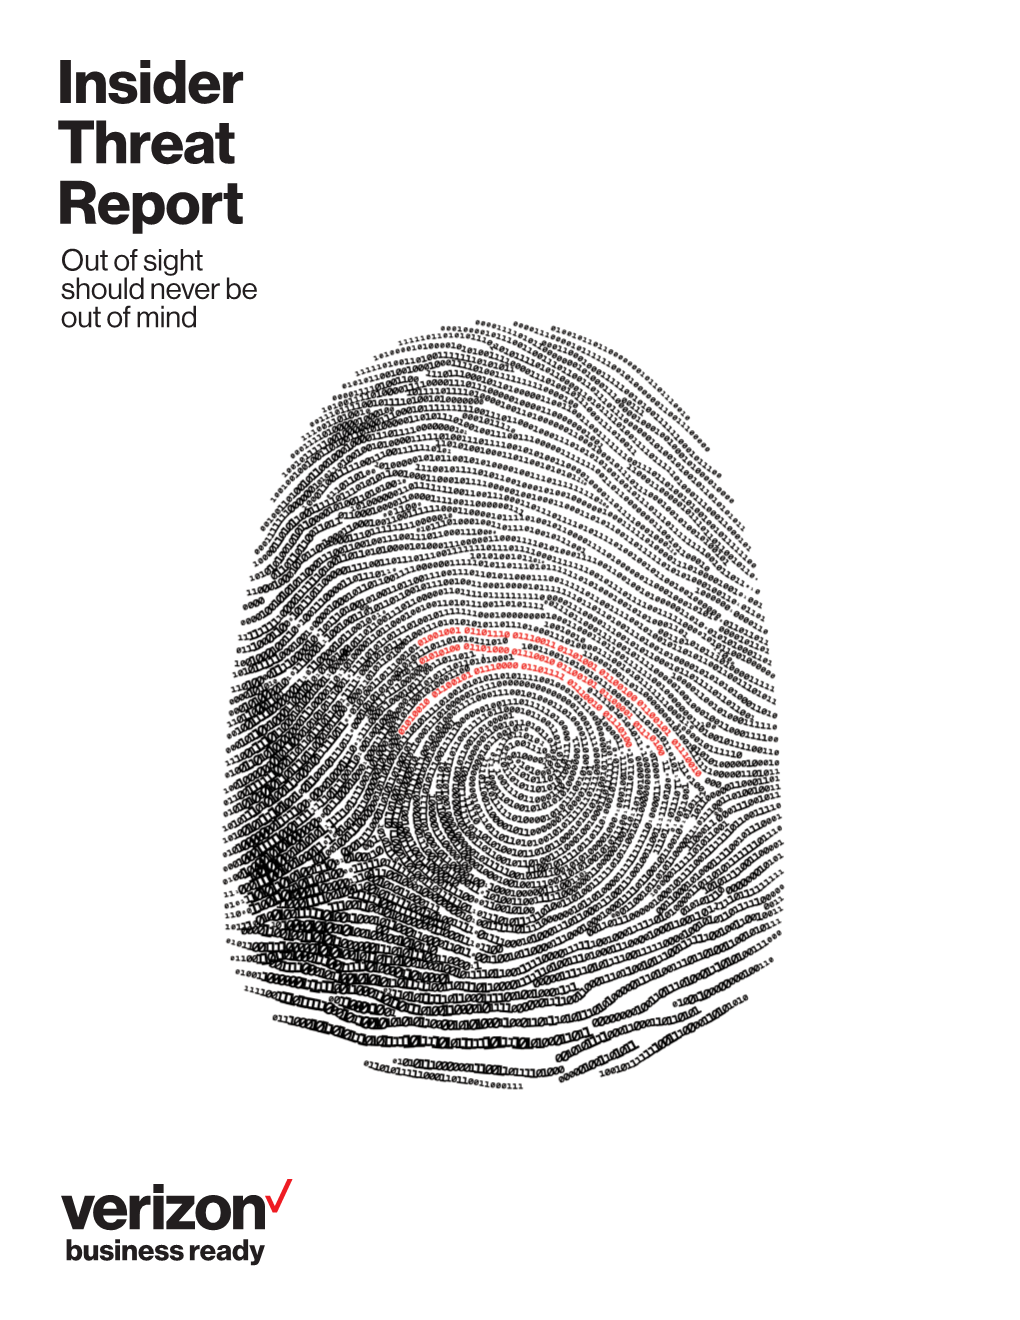 Insider Threat Report out of Sight Should Never Be out of Mind